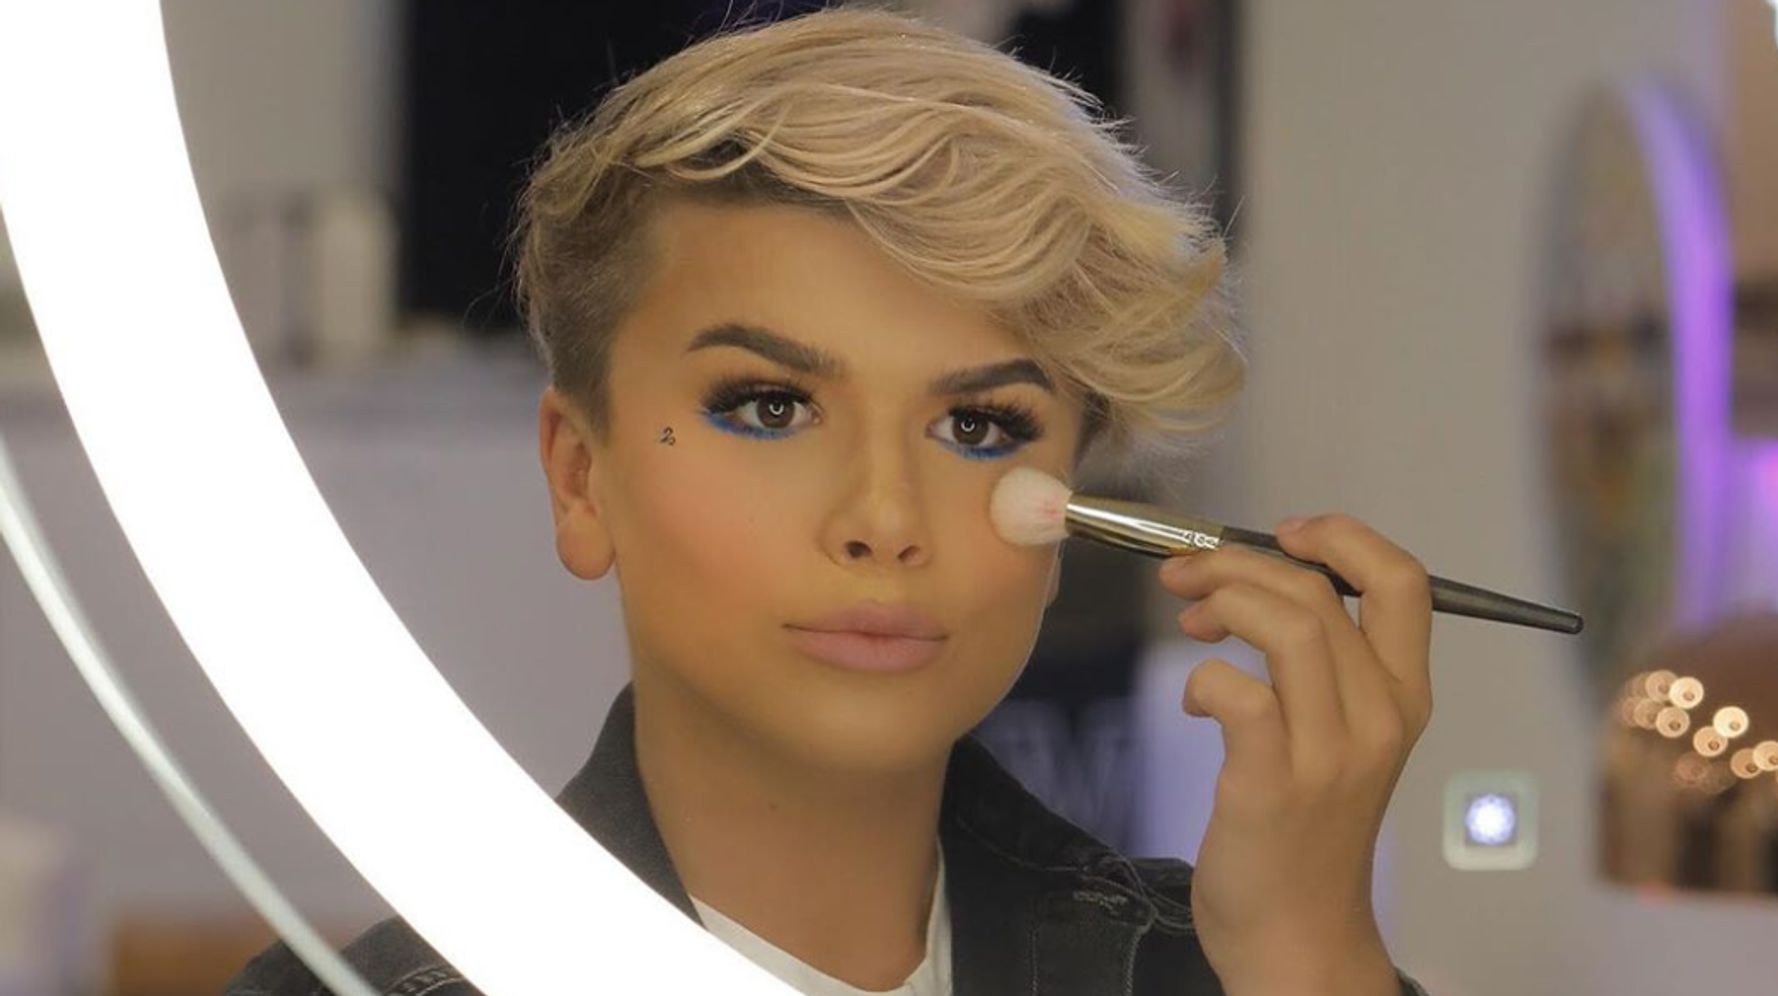 Teen Beauty Vlogger Reuben De Maid On Dealing With Bullying And Hateful Trolls ...